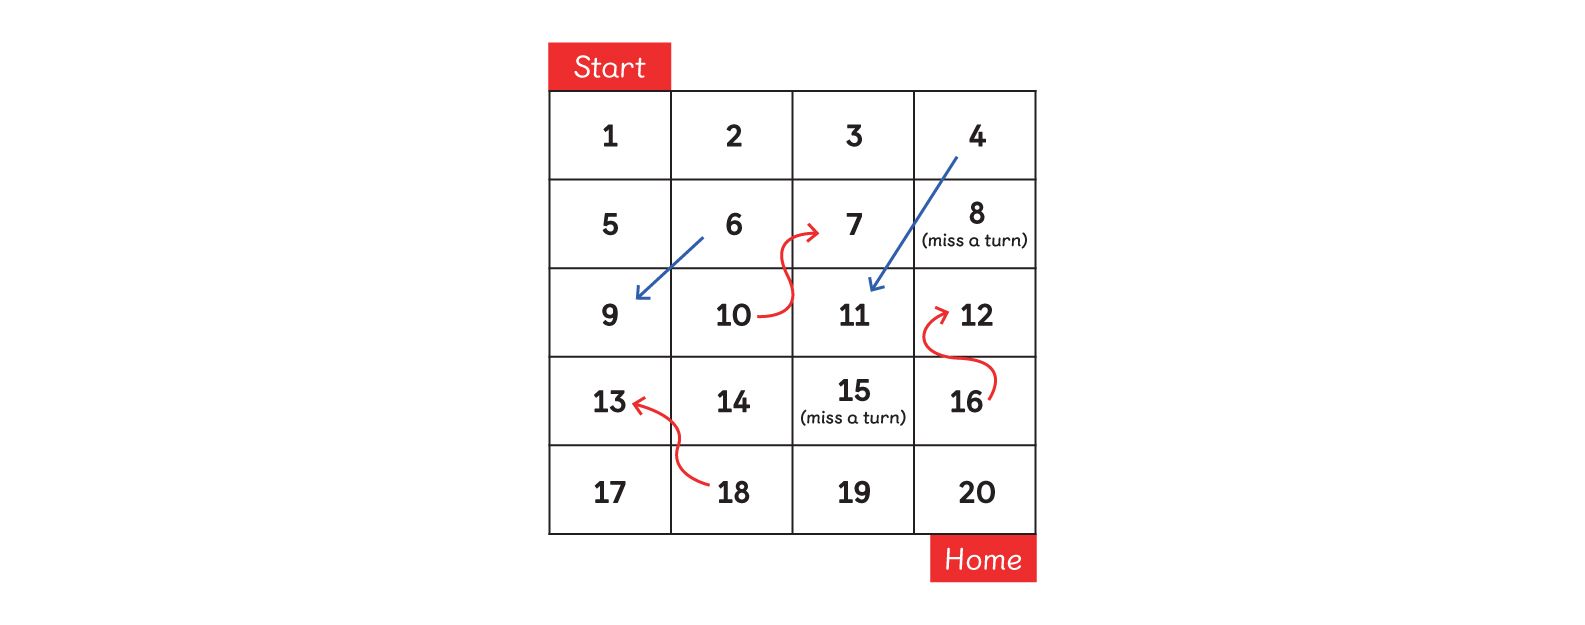 Game #6, addition board game. Players navigate squares laid out 4 across and 5 down and are numbered 1 (start) to 20 (home).